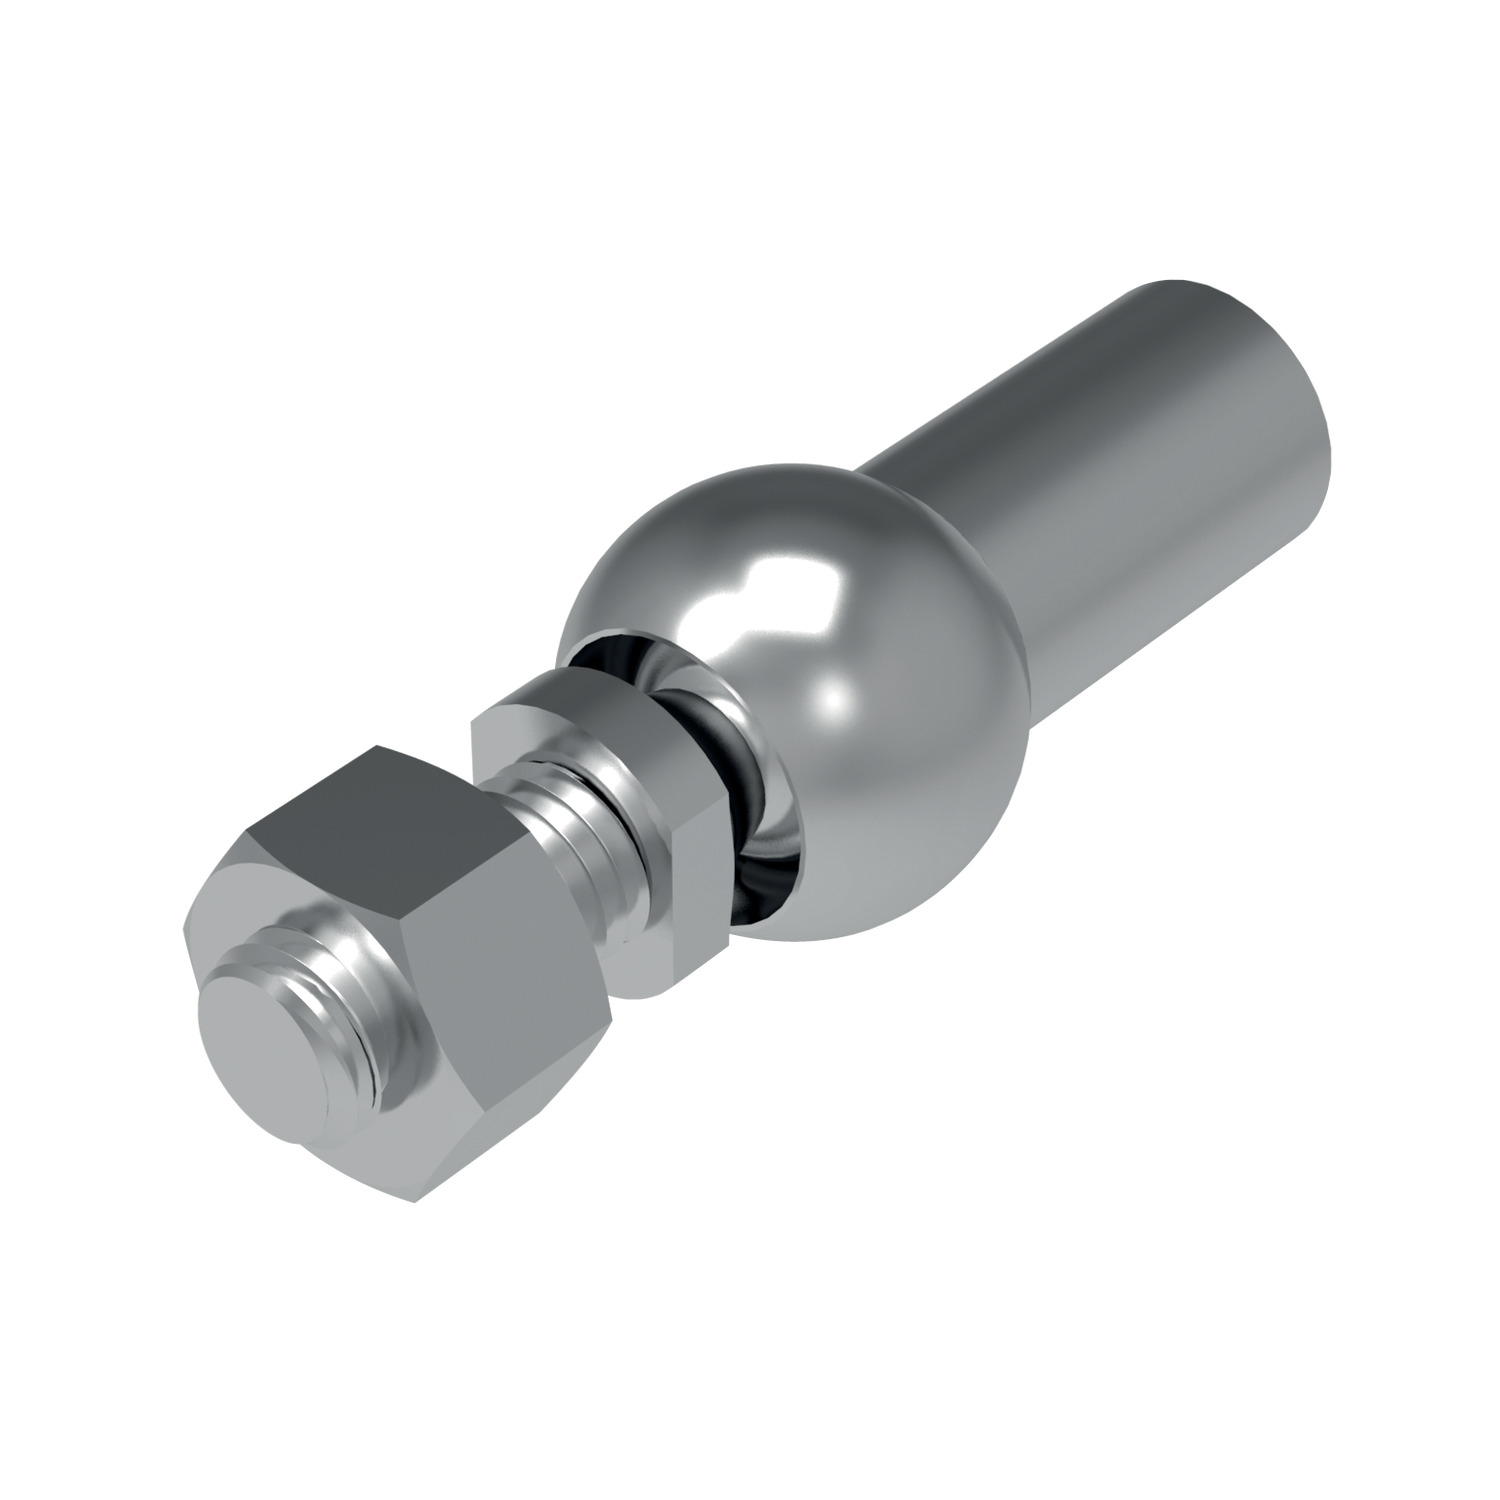 R3506 Stainless Axial Ball and Socket Joints